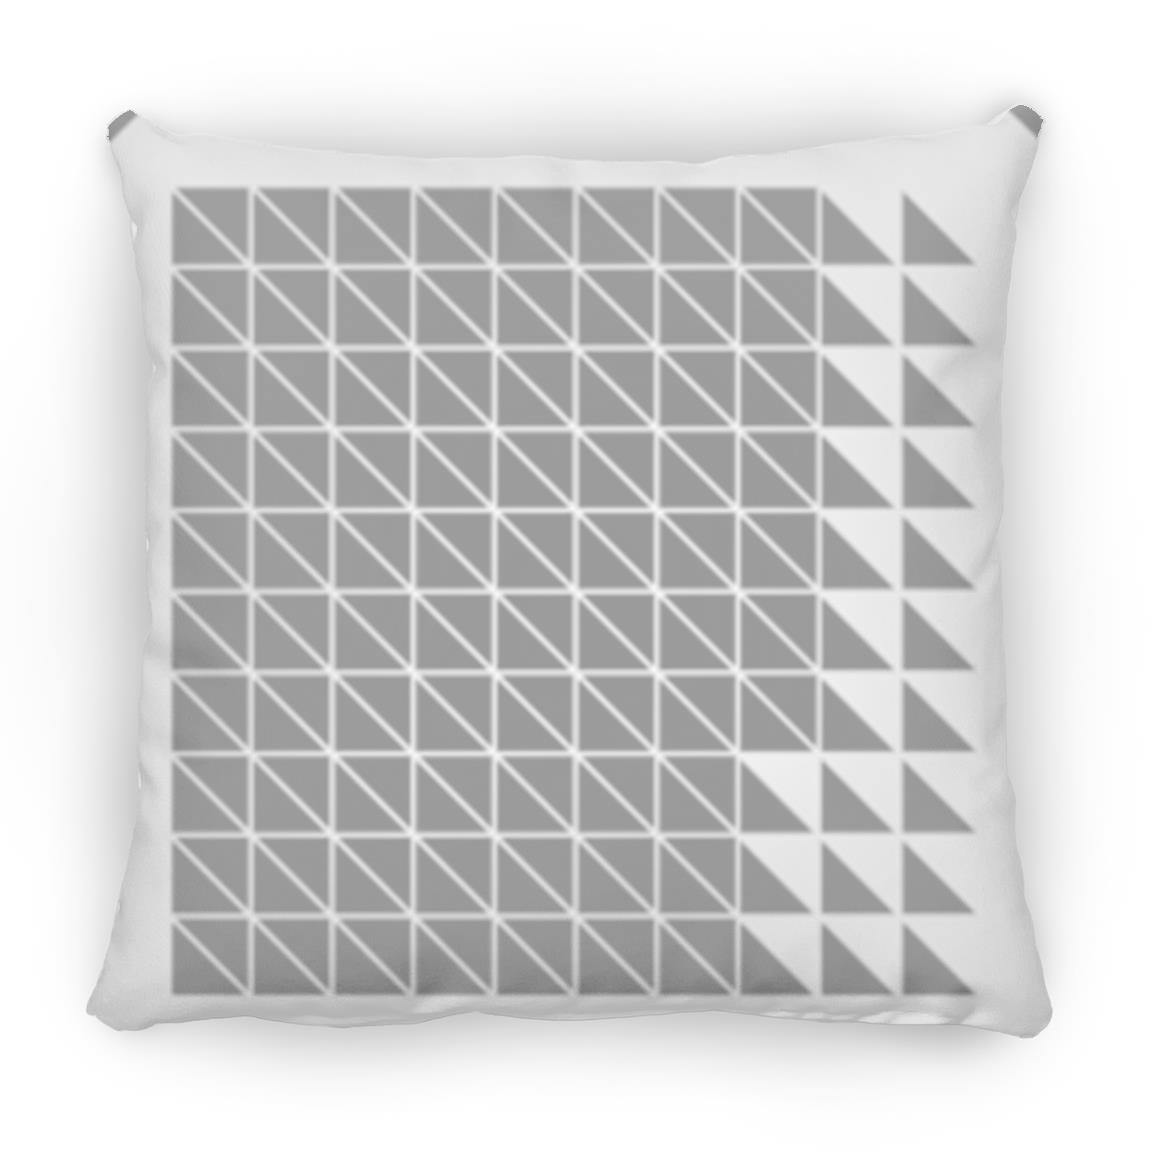 Crop Circle Pillow - Chilcomb - Shapes of Wisdom